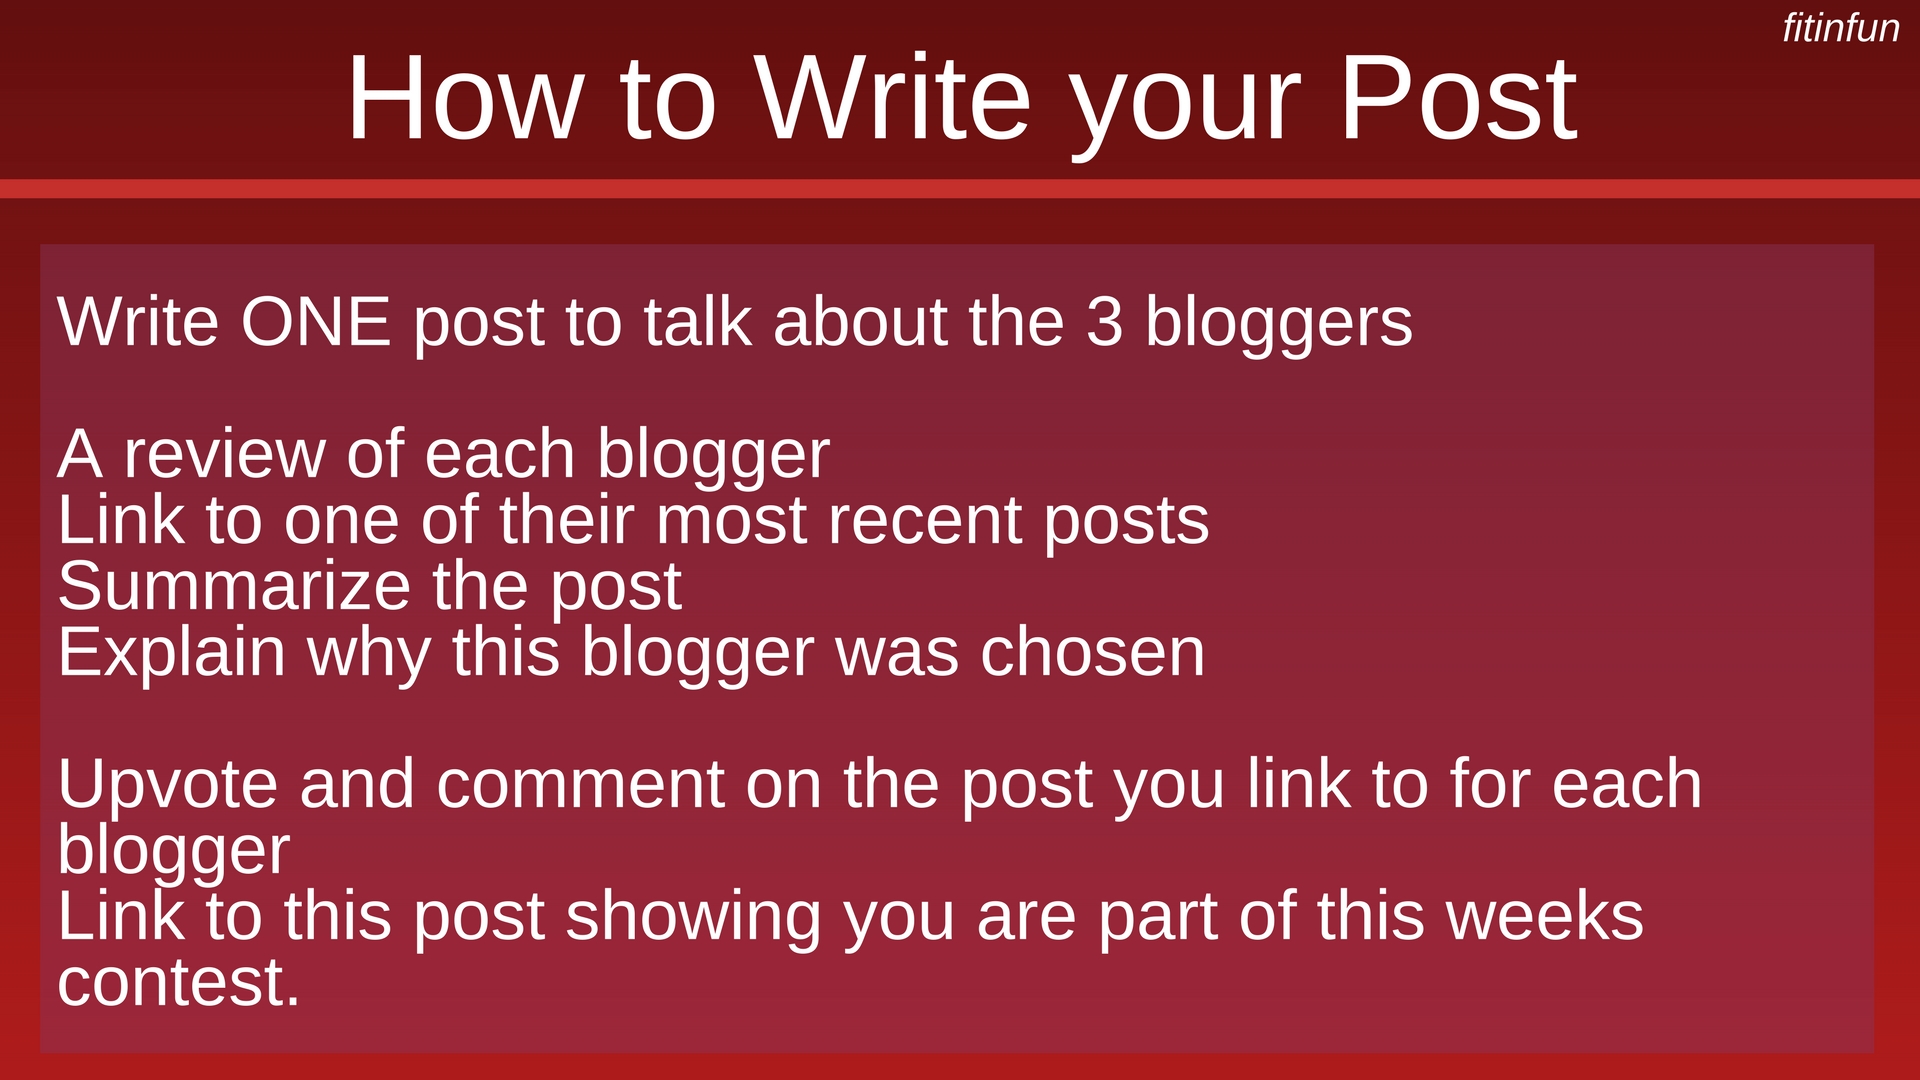 Pay It Forward Contest How to Write your Post by fitinfun.jpg